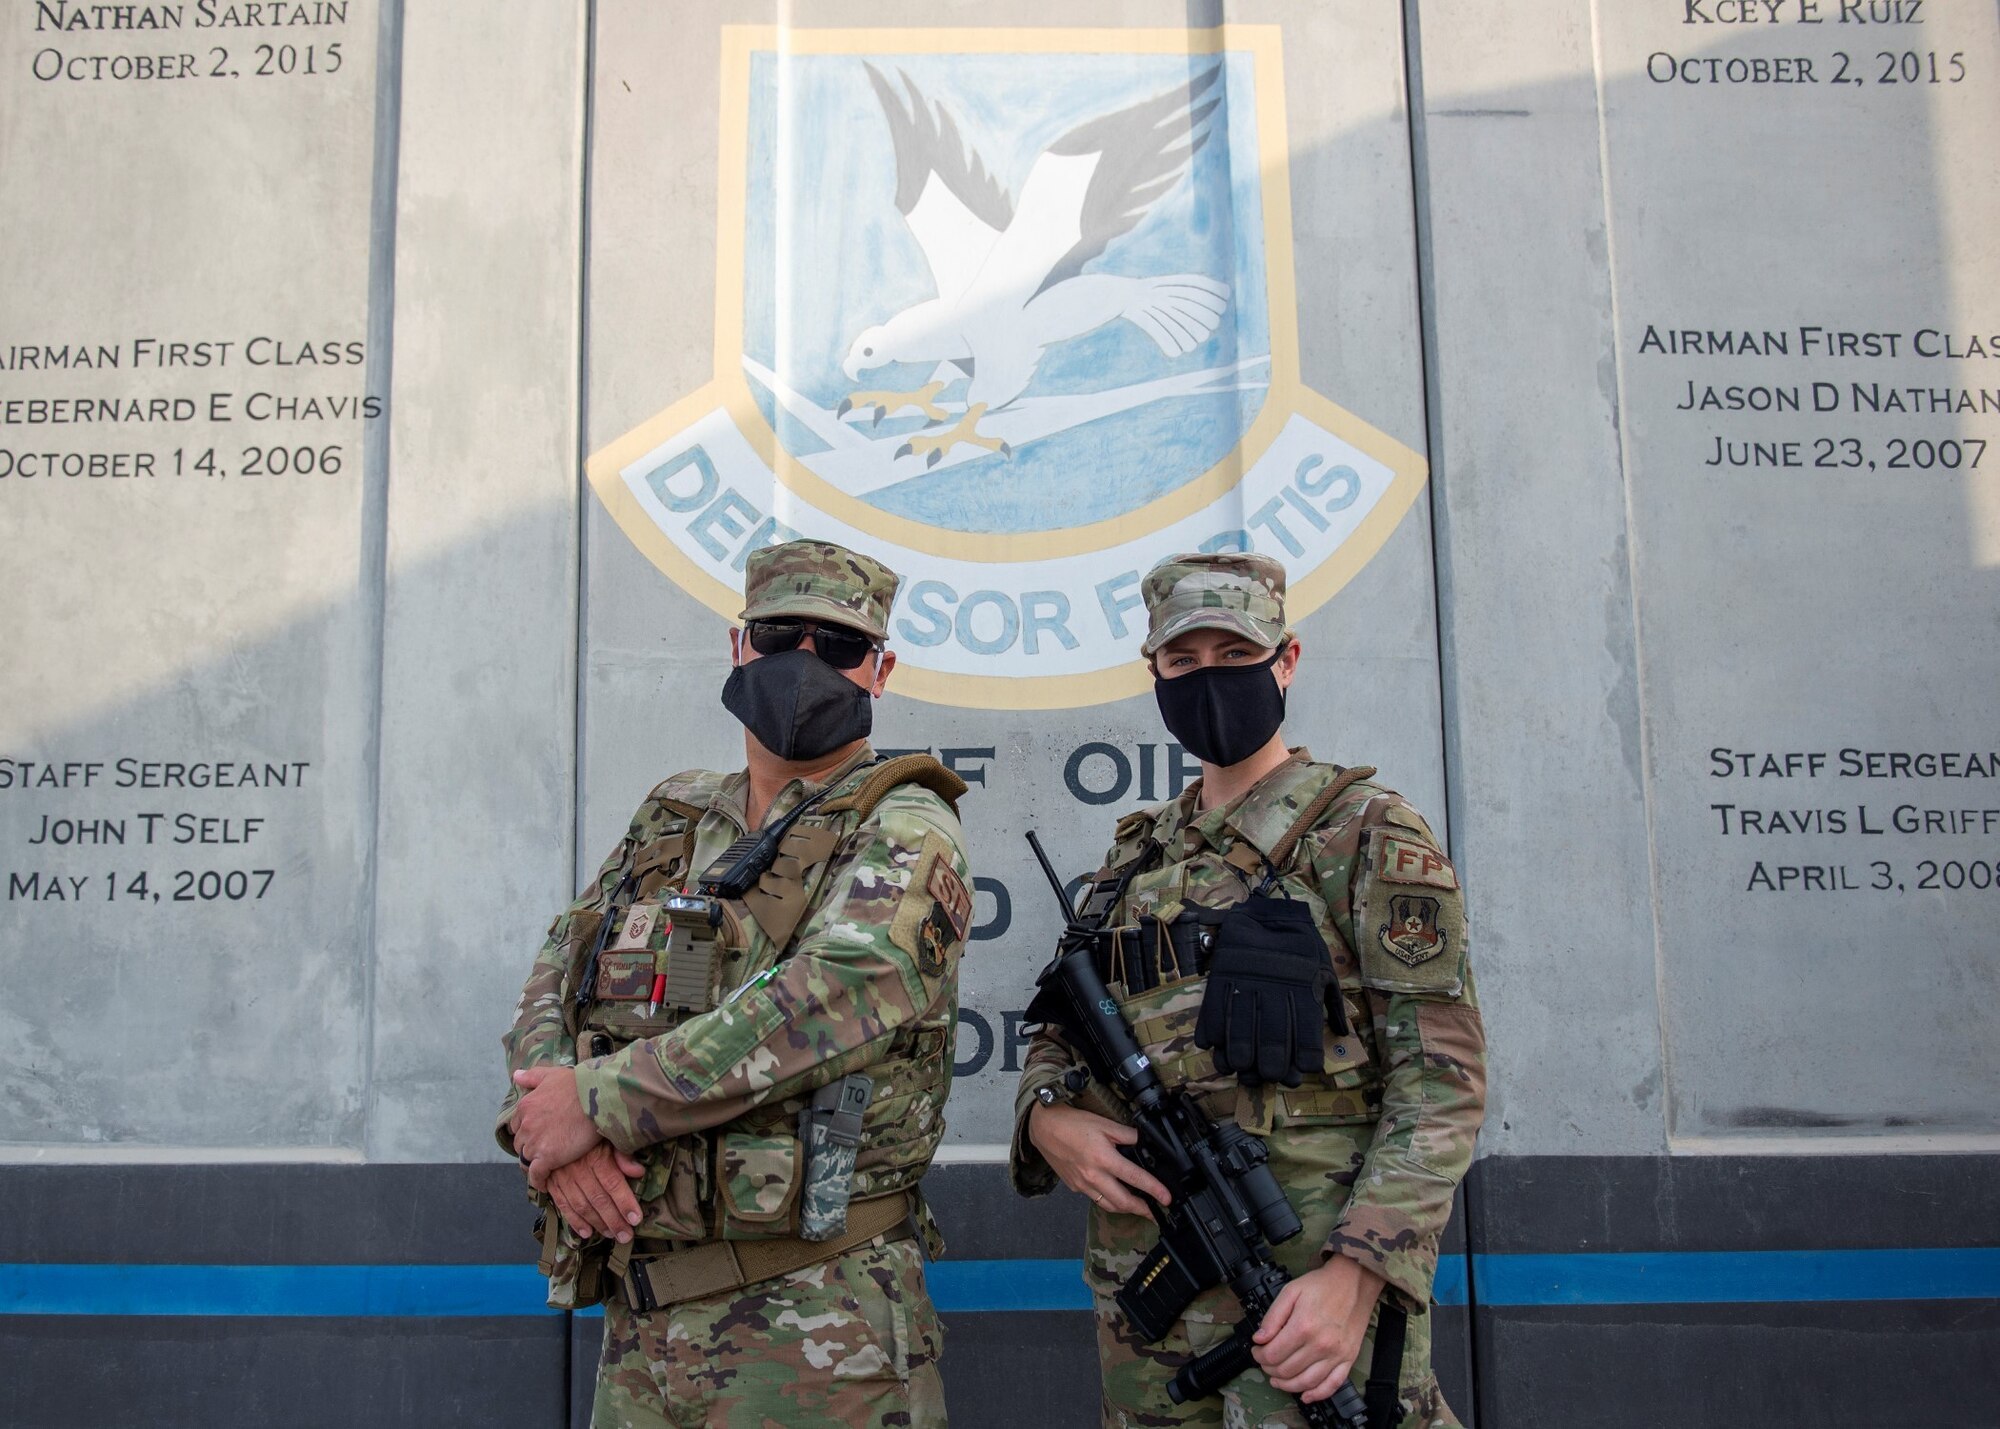 U.S. Air Force Master Sgt. Thomas Fisher, 380th Expeditionary Security Forces Squadron S30A flight chief, and Staff Sgt. Hannah Ortloff, 380th ESFS Security Forces augmentee, stand in front of t-walls with the SF insignia at Al Dhafra Air Base, United Arab Emirates, Nov. 22, 2020.